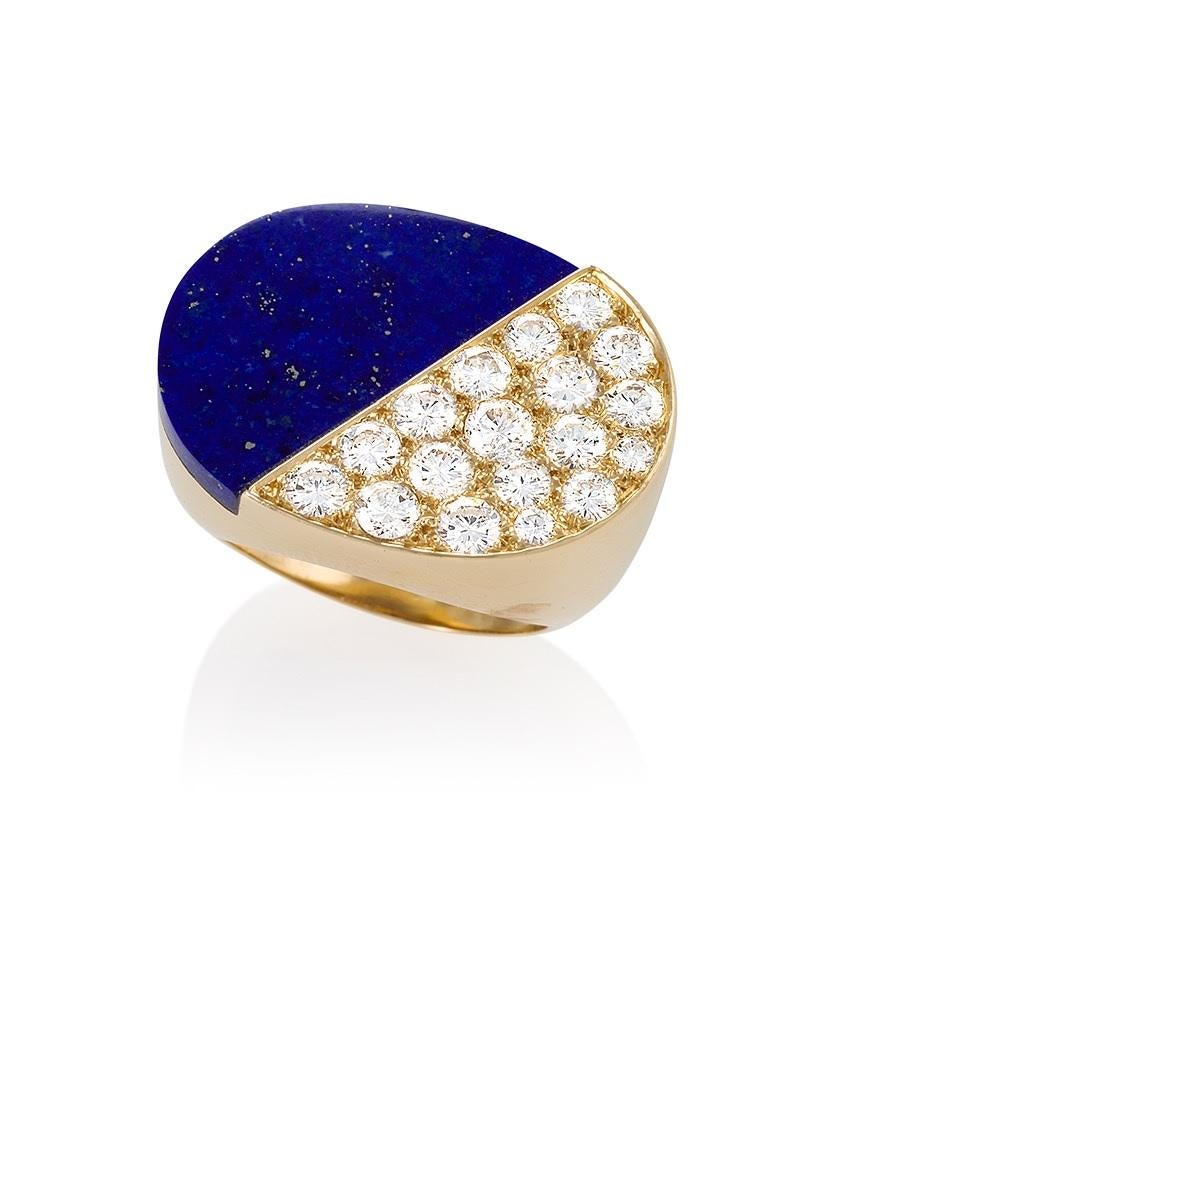 A French 18 karat gold ring with diamonds and lapis lazuli by Cartier. The sizable ring features a flat oblong crown, diagonally split between a sold piece of lapis lazuli and pavé-set diamonds. The ring has 18 round diamonds with an approximate